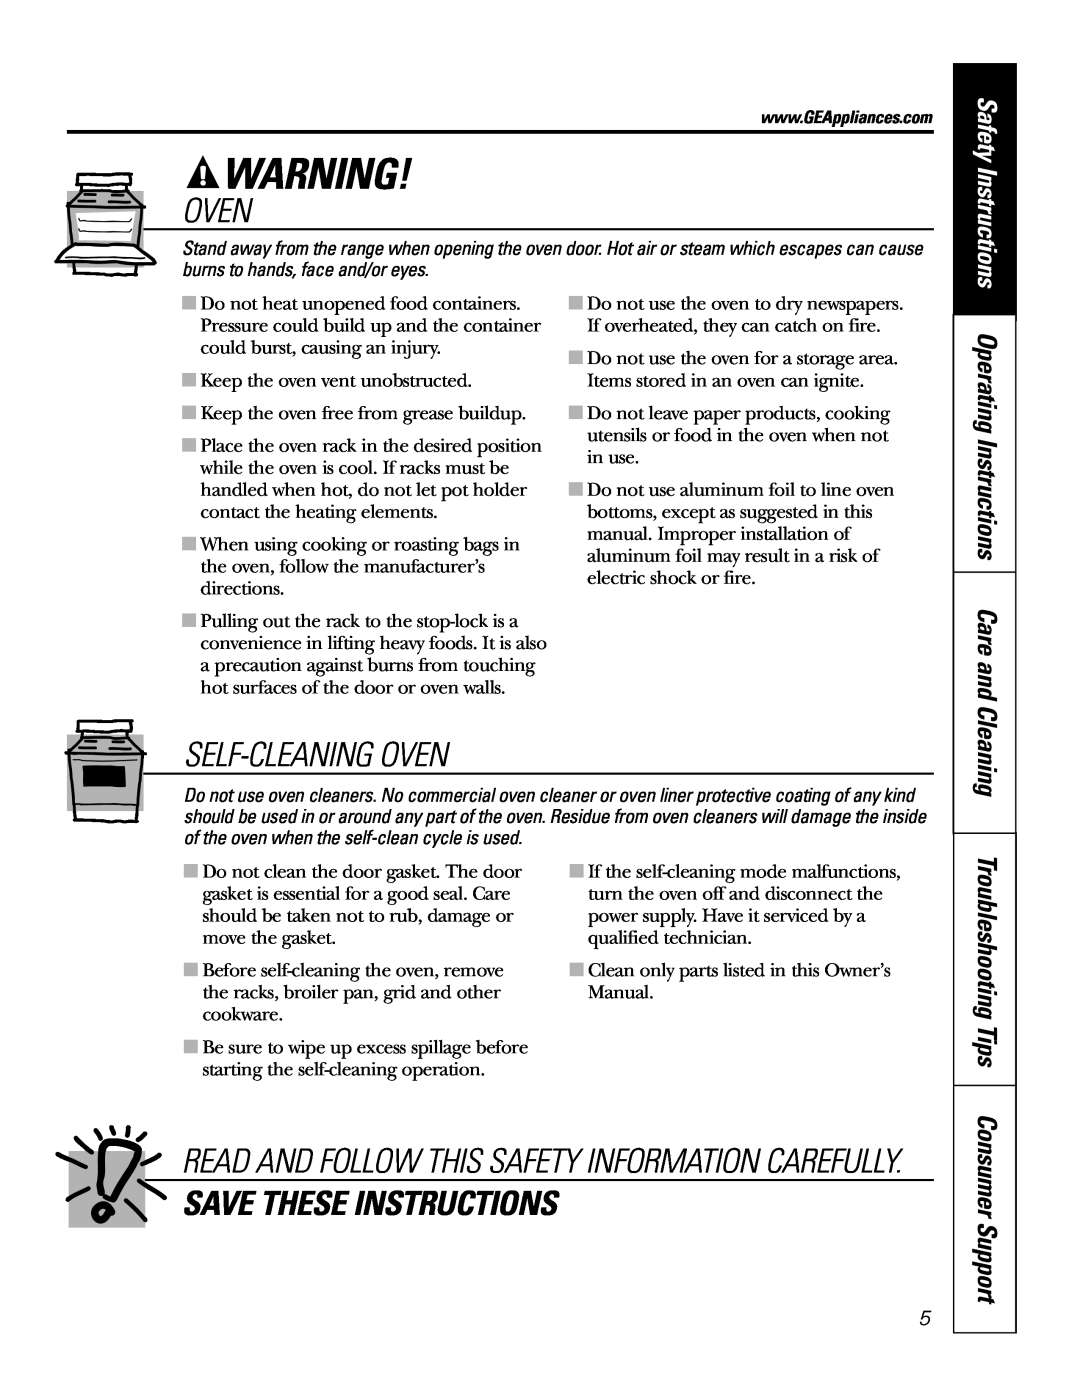 GE JDP47 Self-Cleaning Oven, Save These Instructions, Operating Instructions Care and, Troubleshooting Tips 